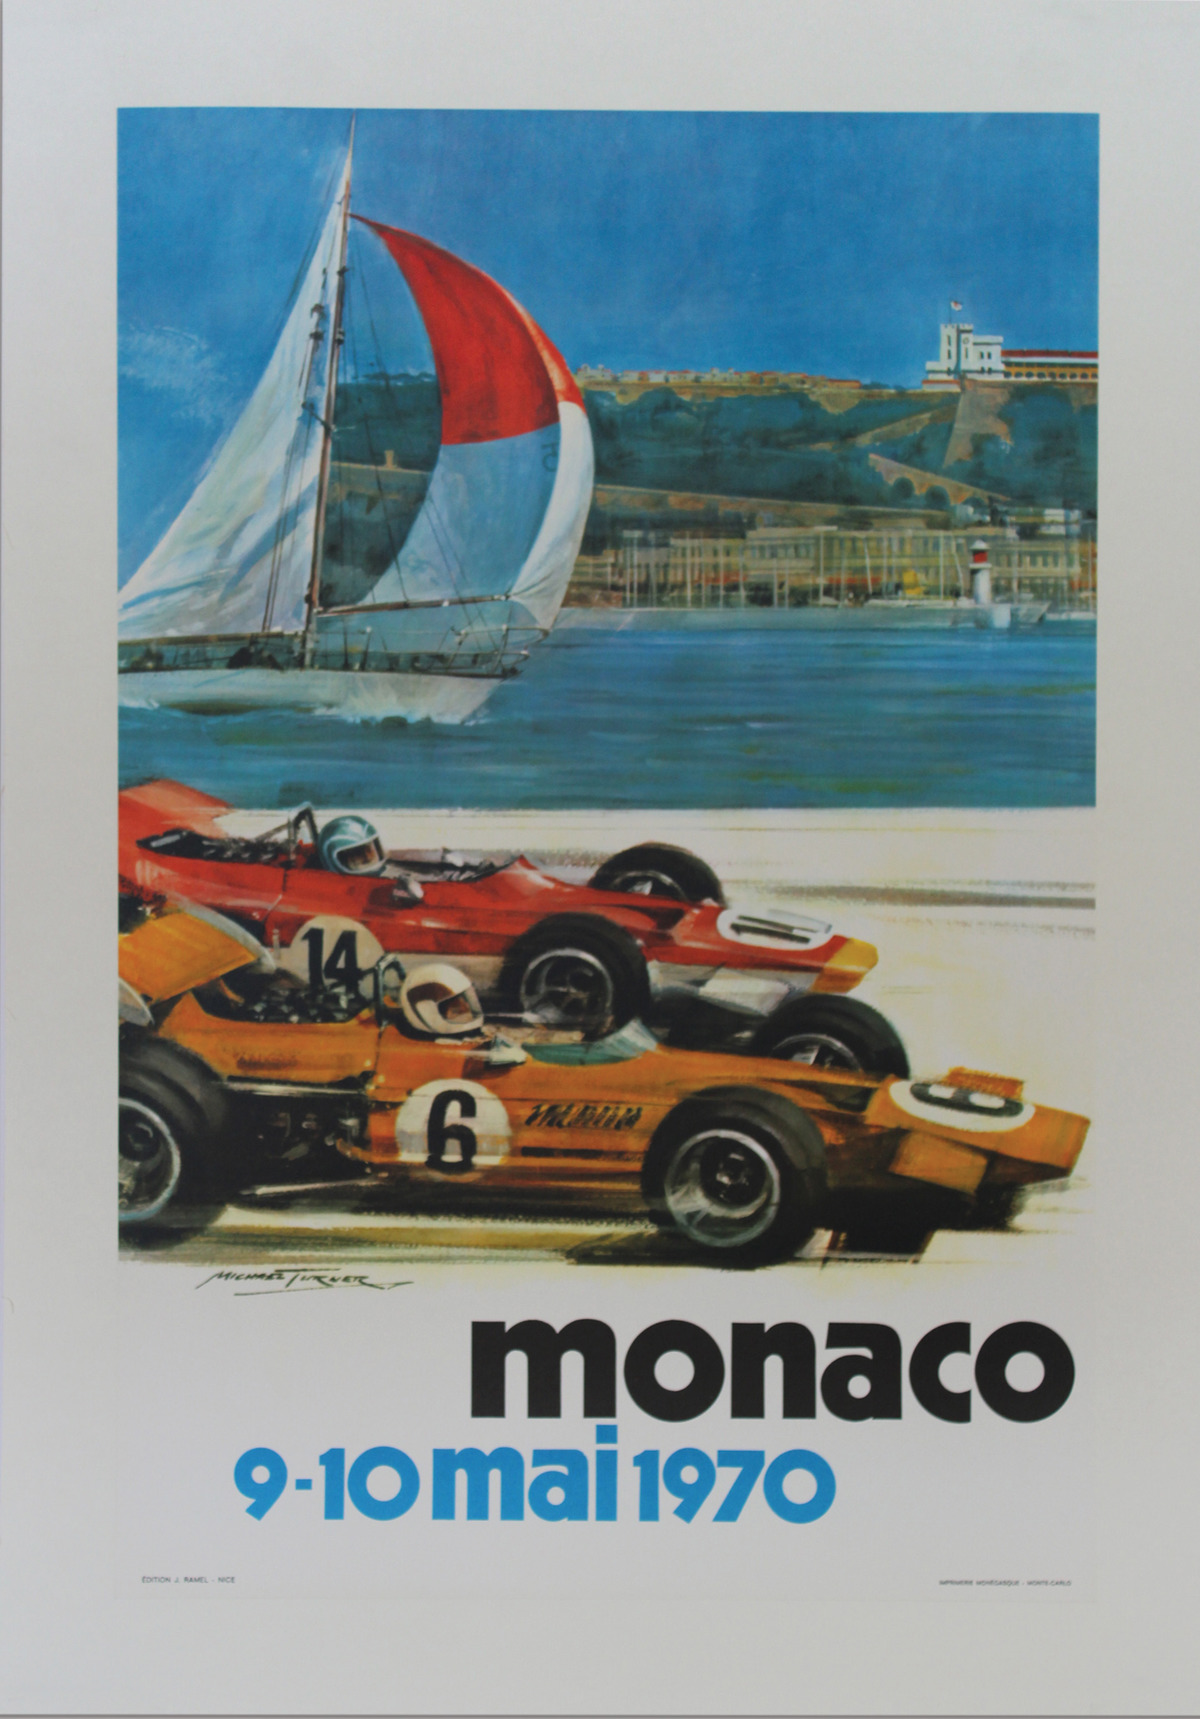 Monaco 9-10 Mai 1970 Original Event Poster offered in RM Sotheby's The Art of Competition online auction 2020